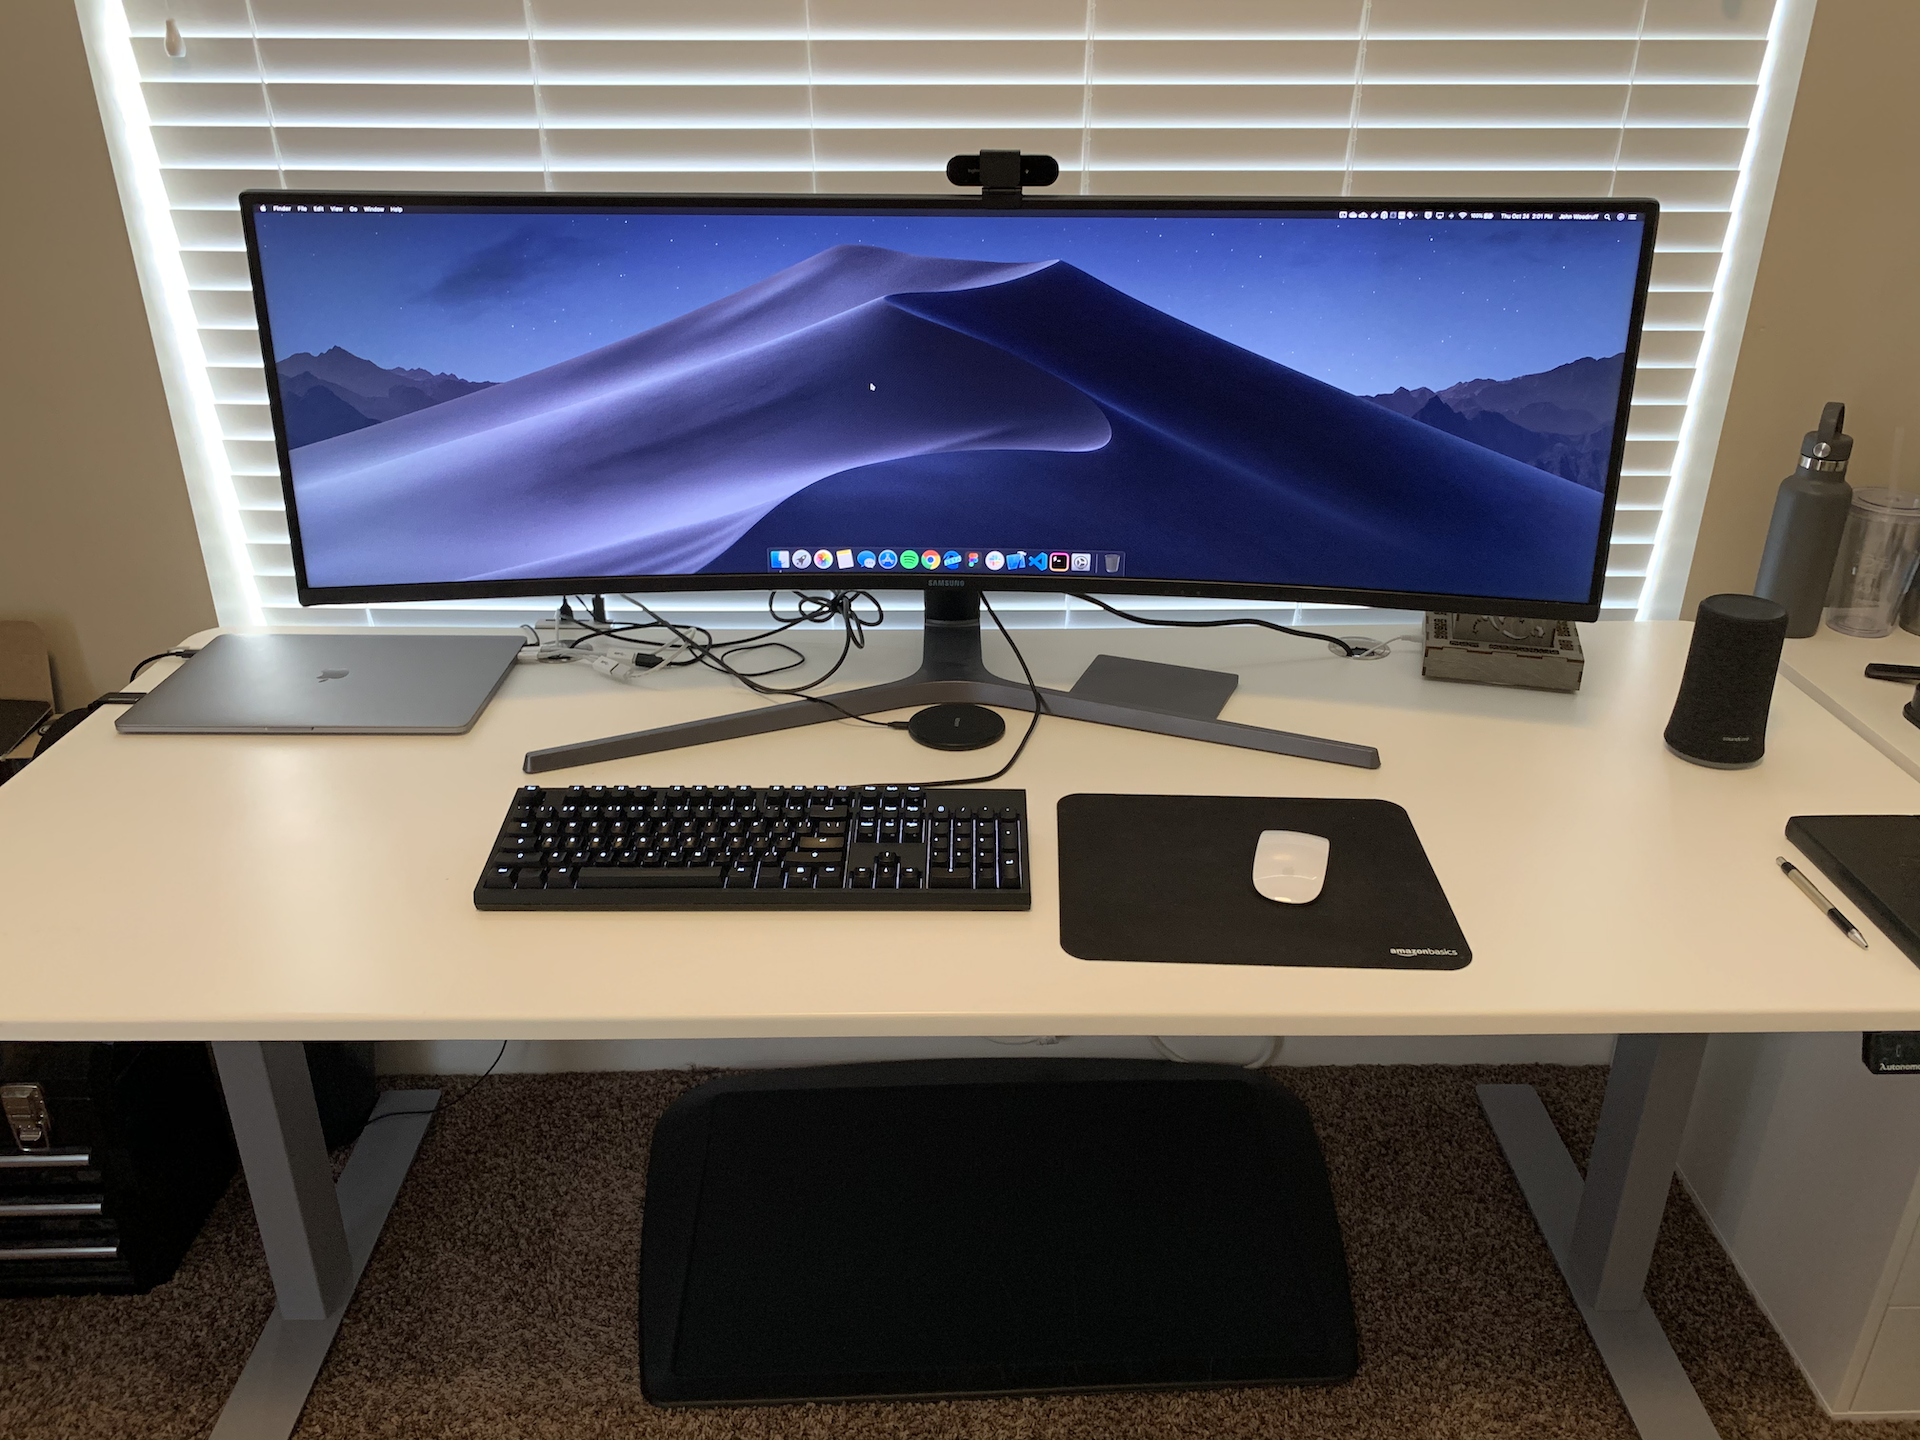 Front view of my workstation setup